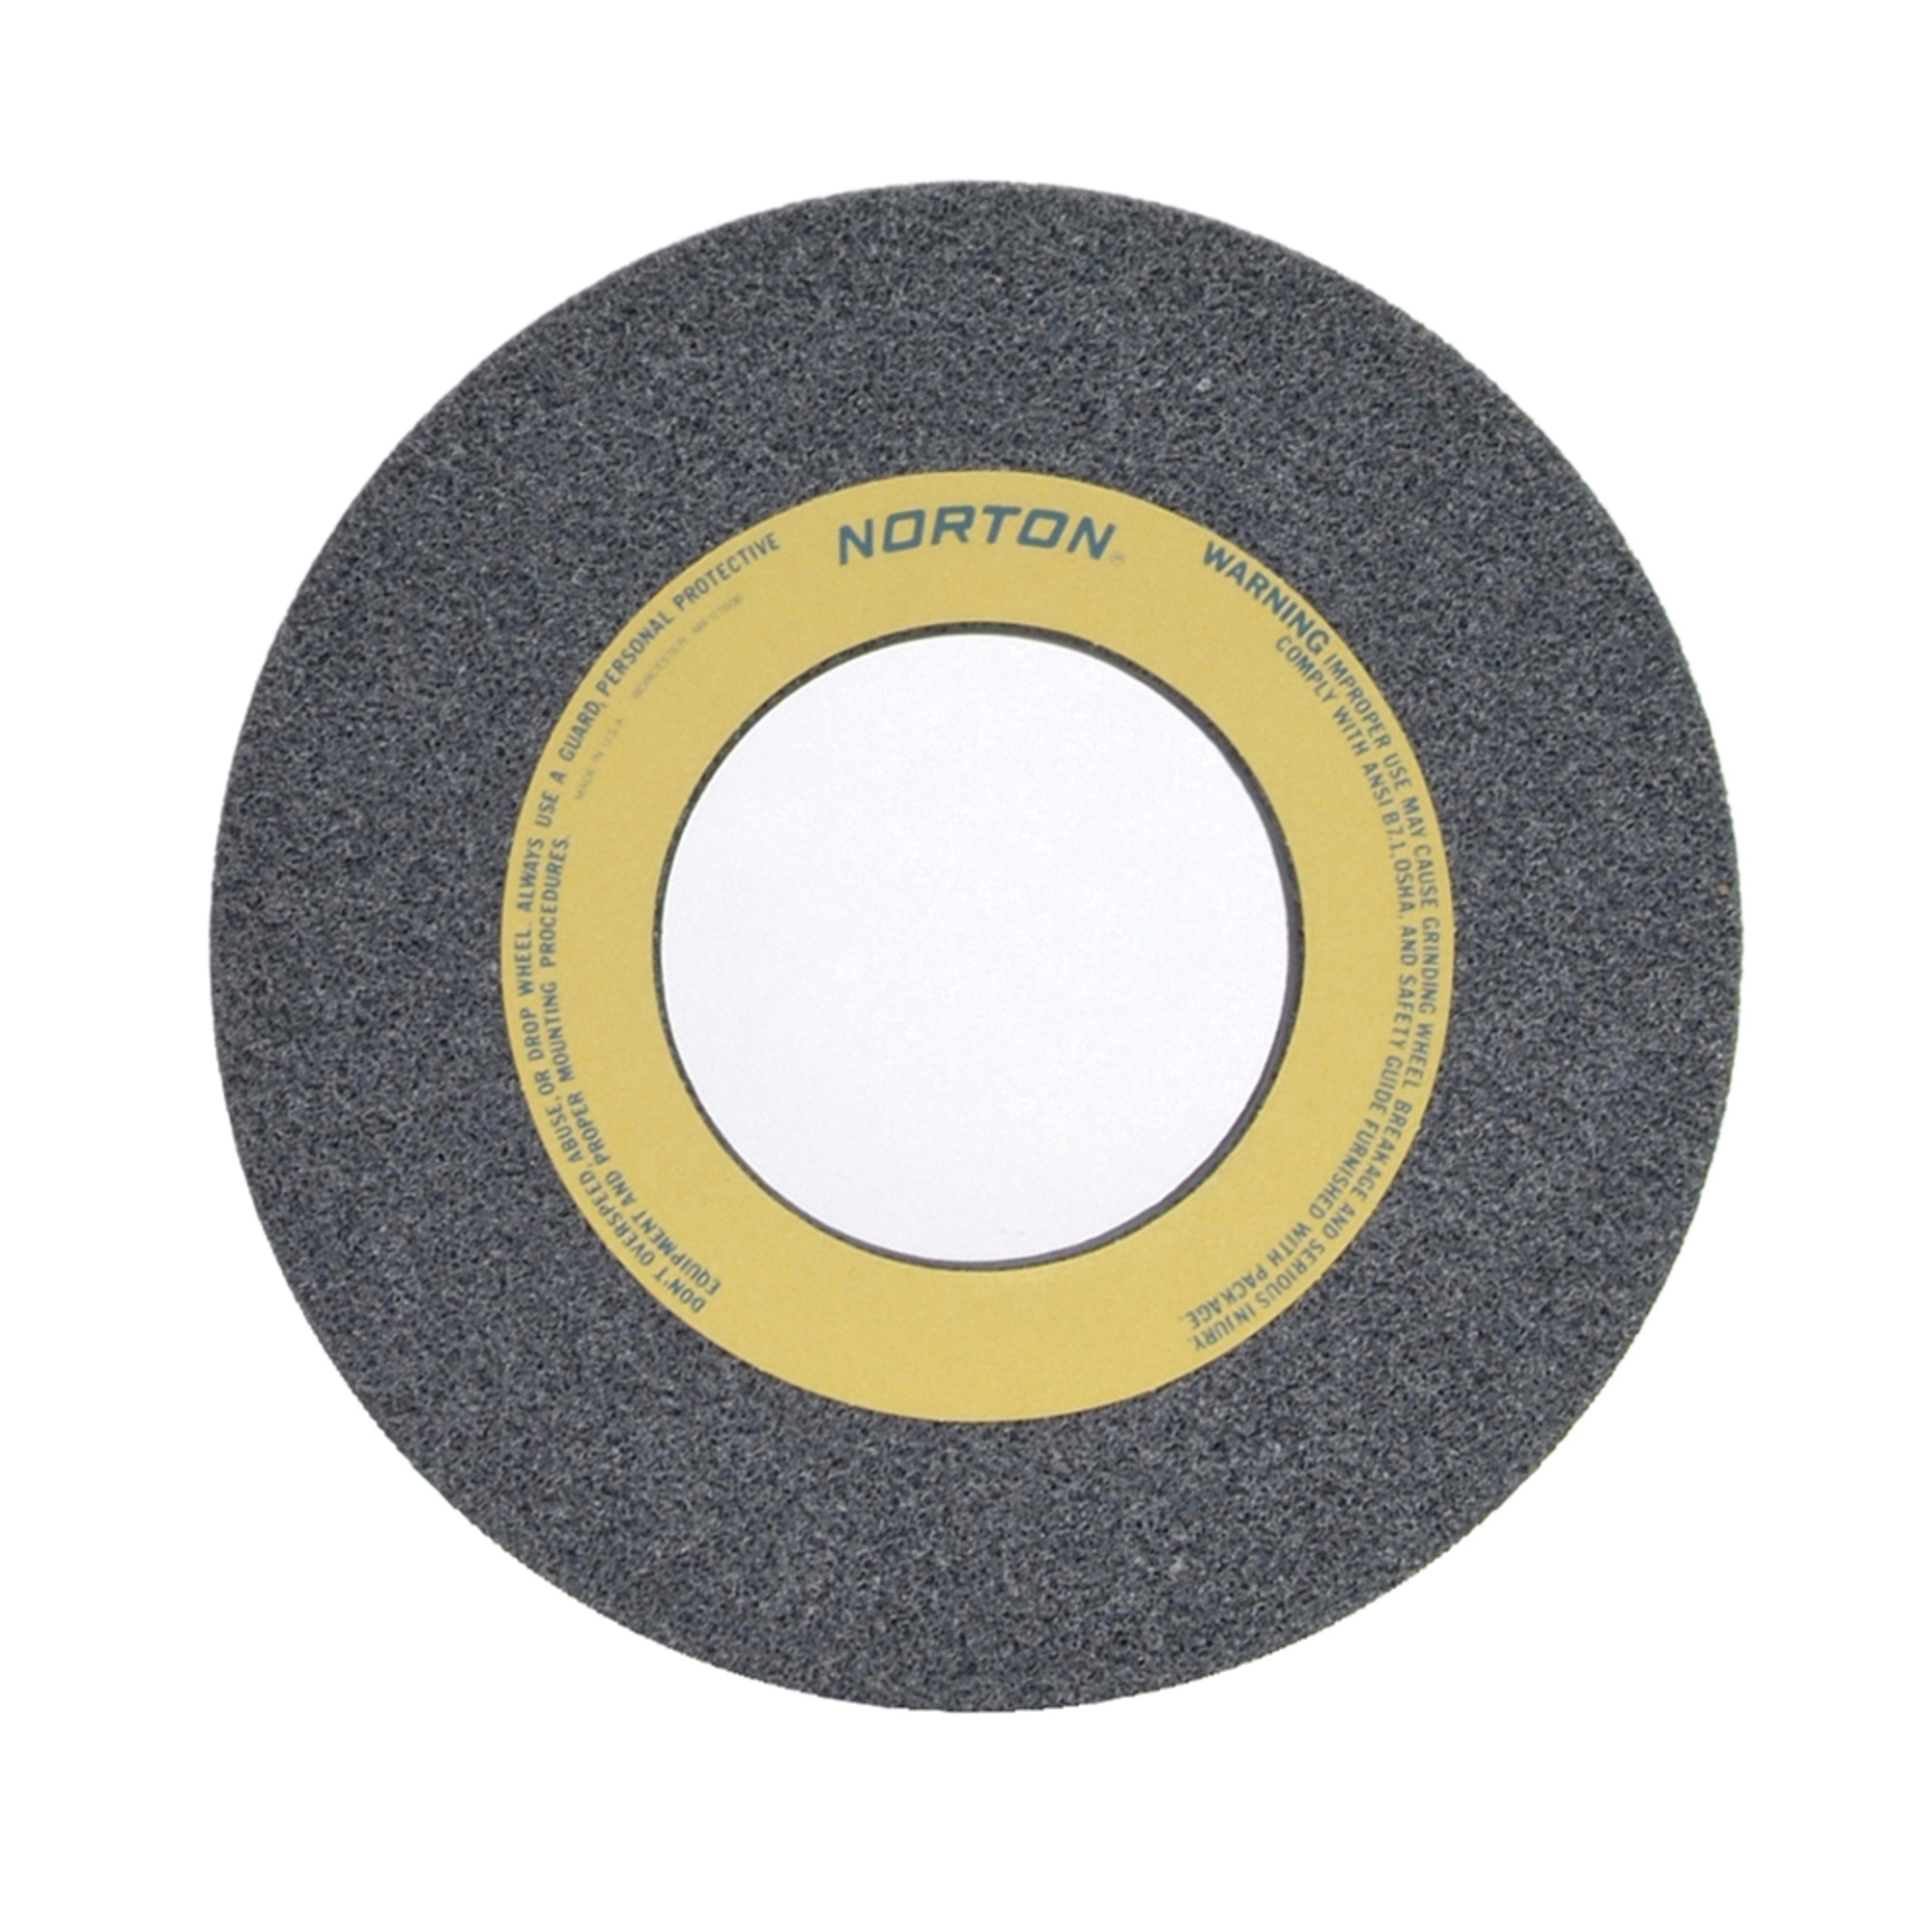 Norton® 66253364342 32A Straight Toolroom Wheel, 14 in Dia x 1-1/2 in THK, 5 in Center Hole, 60 Grit, Aluminum Oxide Abrasive